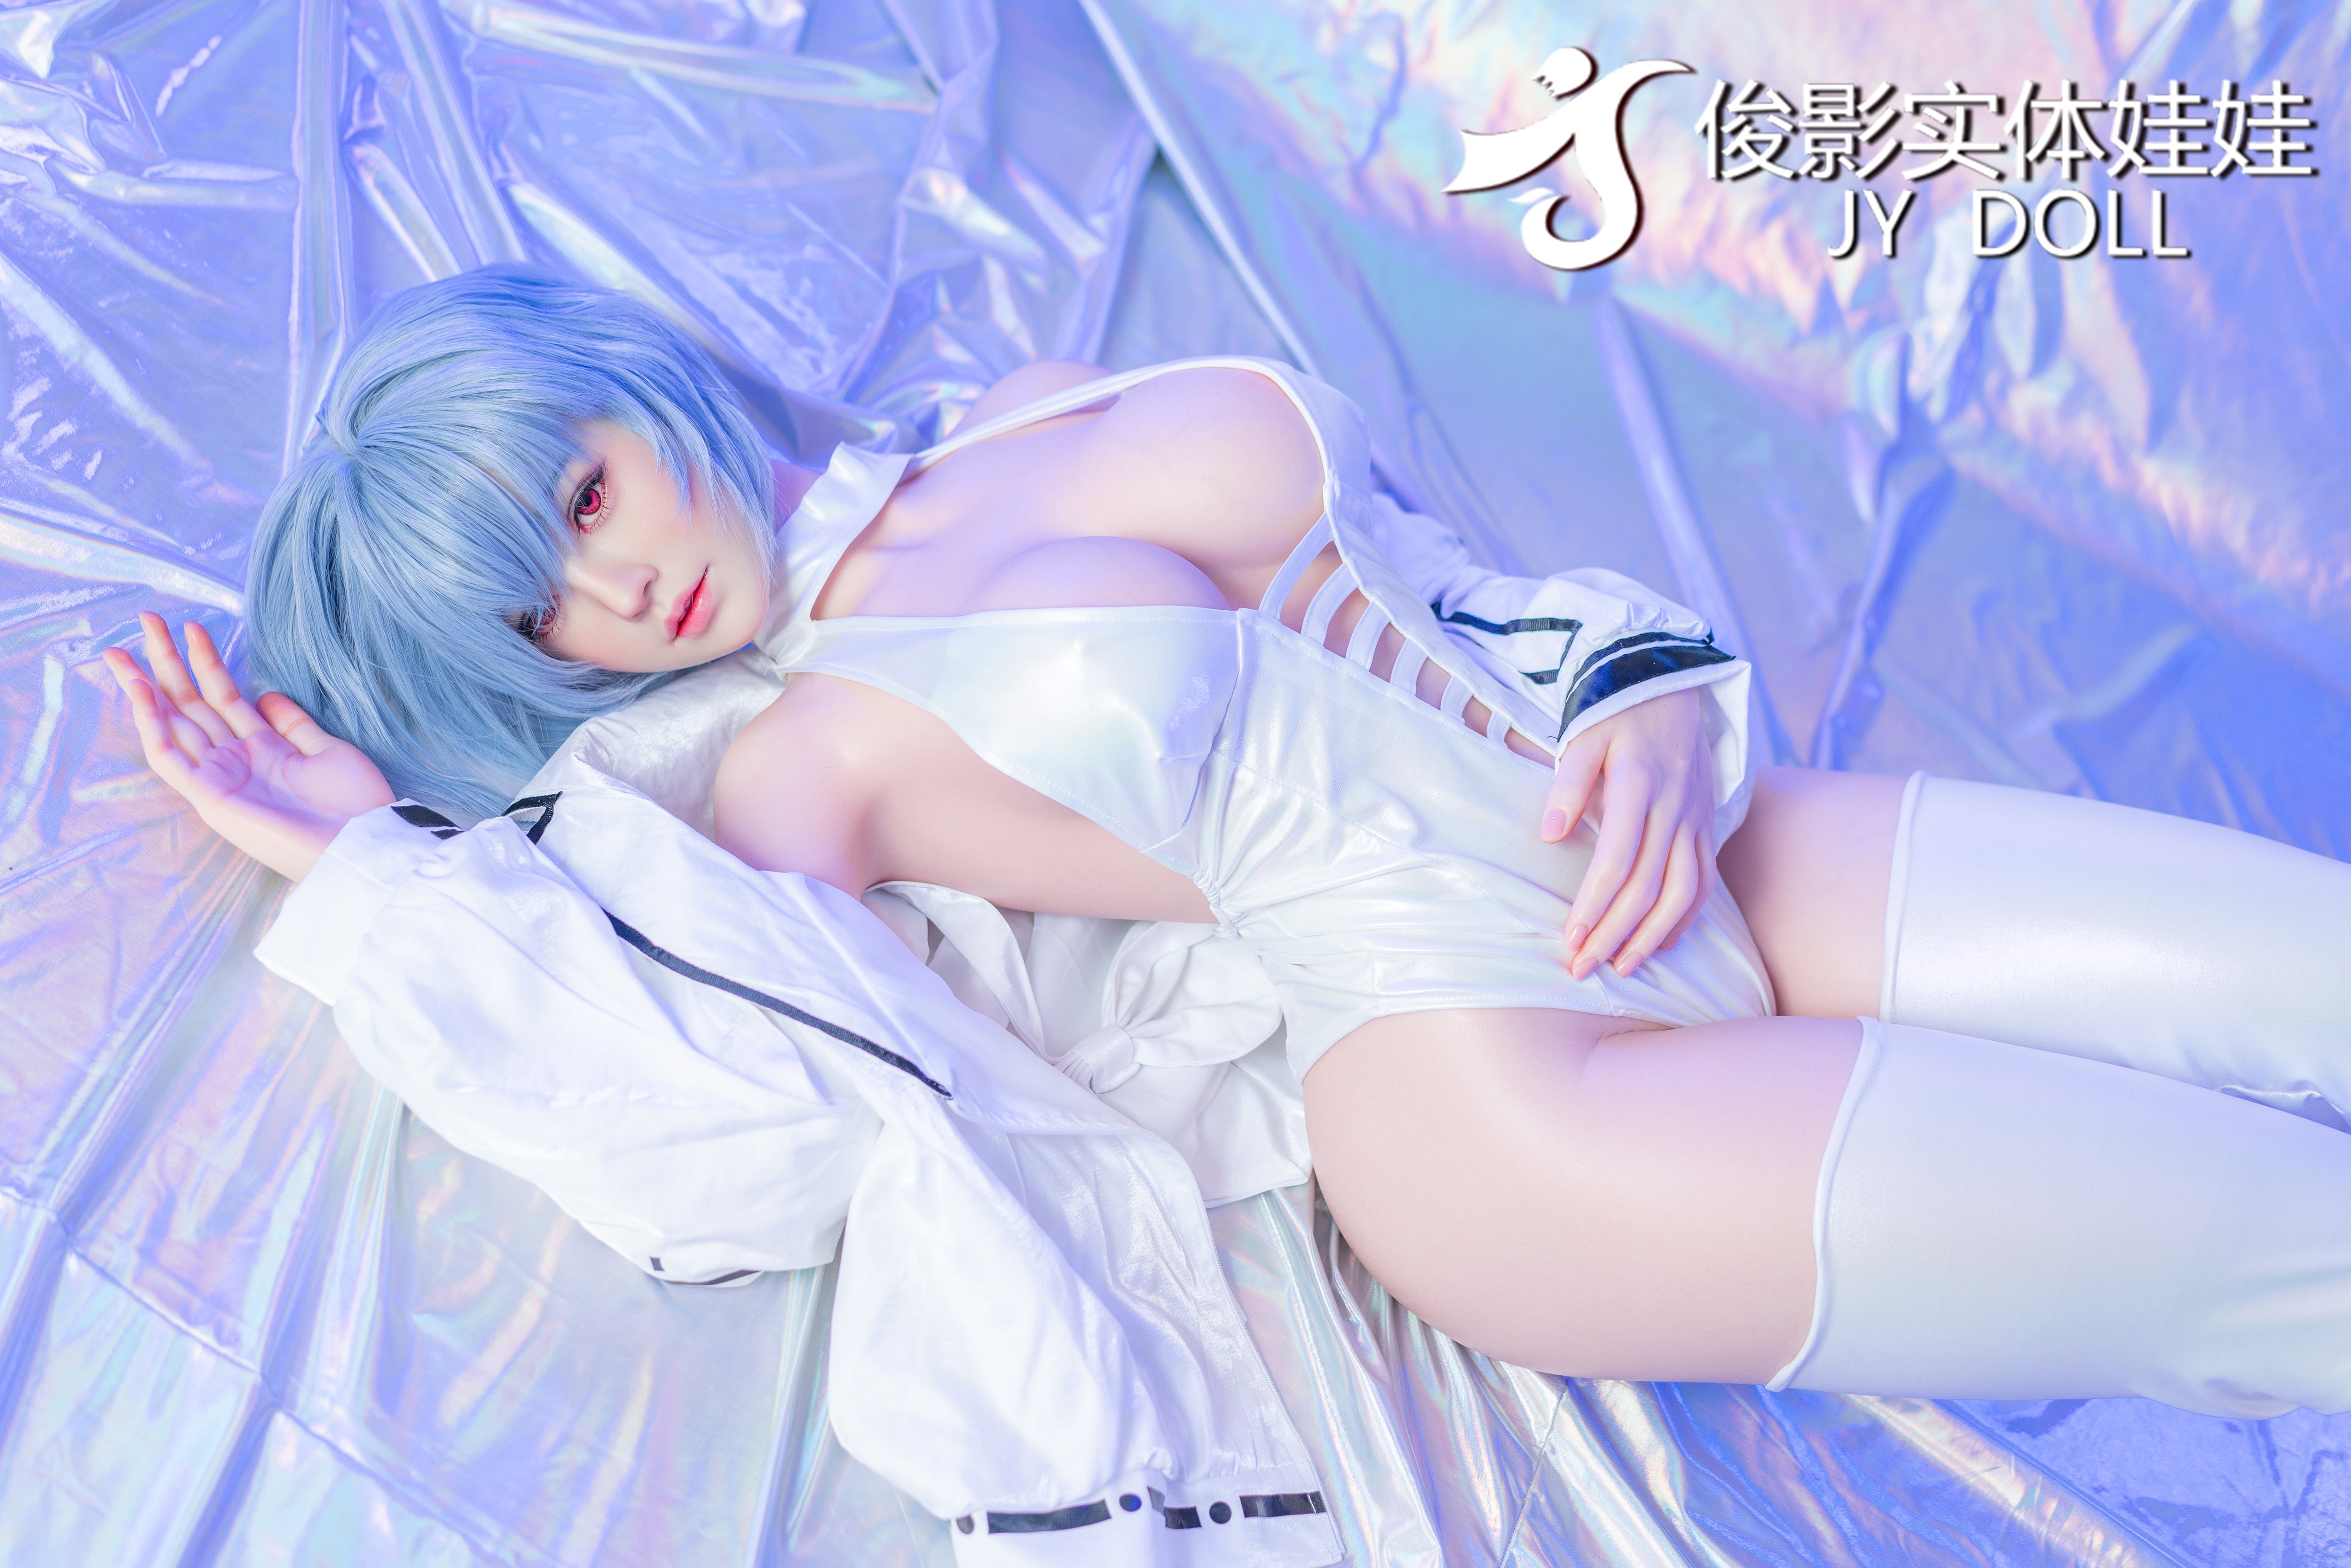 JY Doll 163 cm Silicone - Ayanami | Buy Sex Dolls at DOLLS ACTUALLY